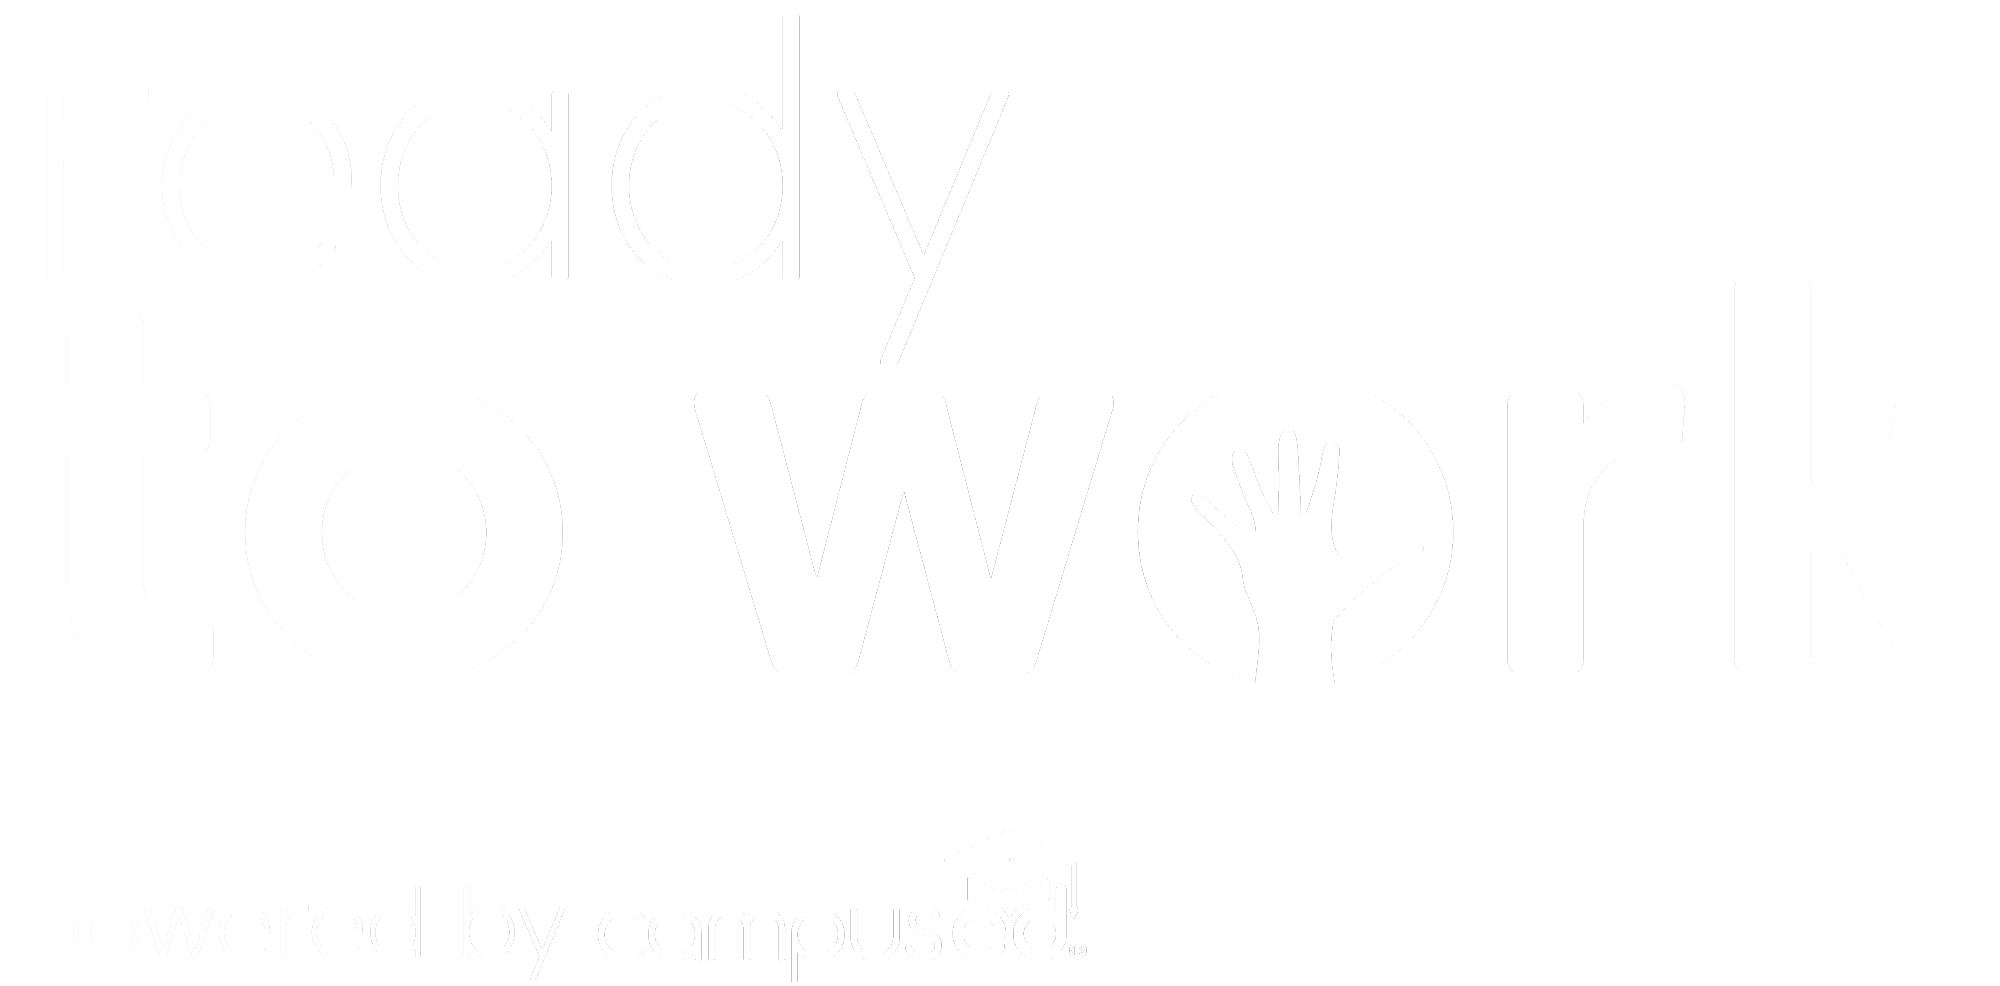 Ready to Work powered by CampusEd